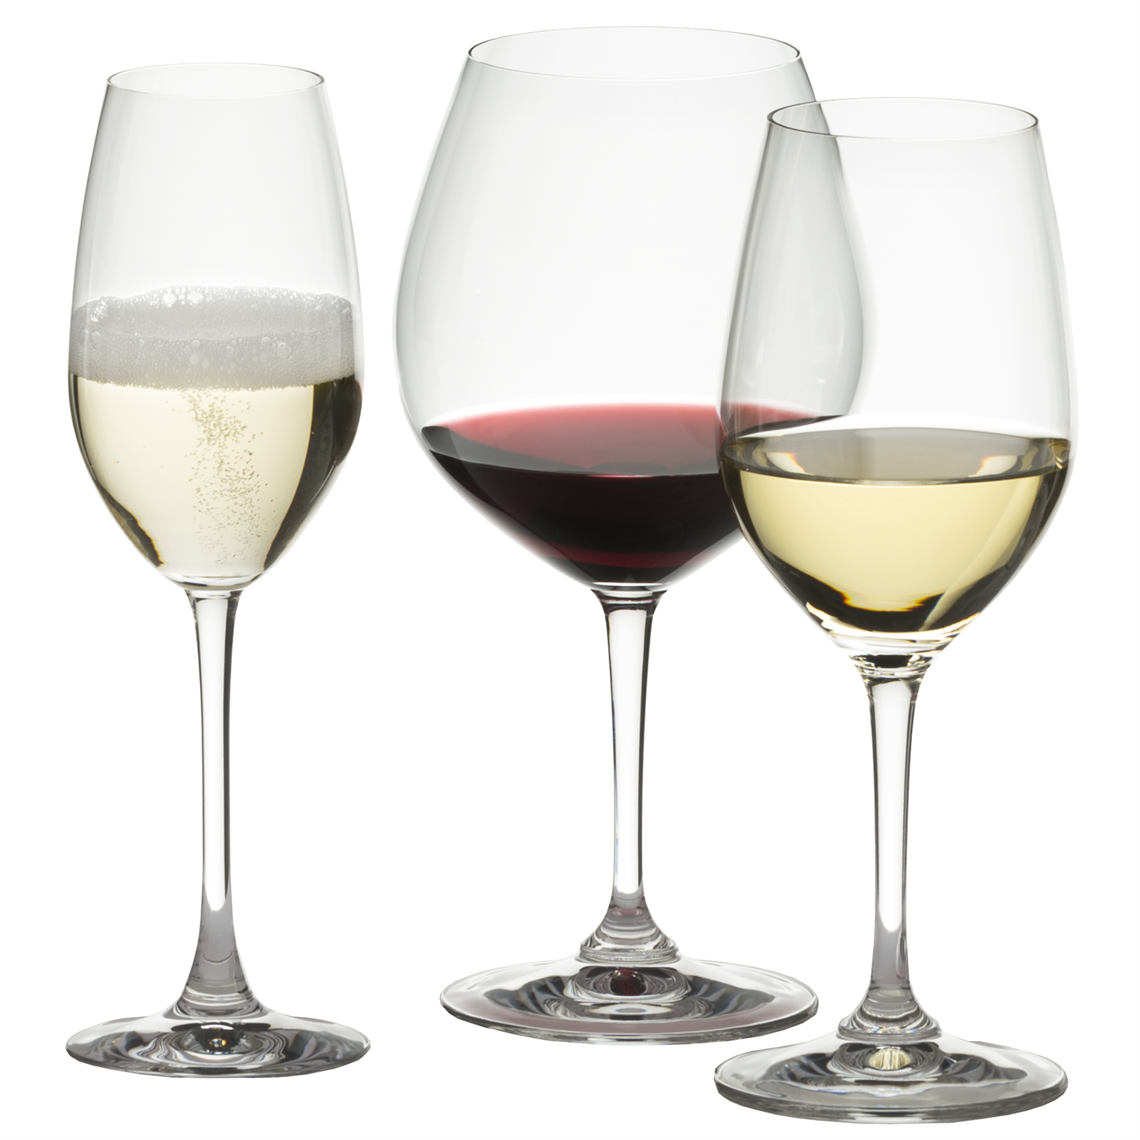 View more mark thomas from our Restaurant & Trade Glasses range